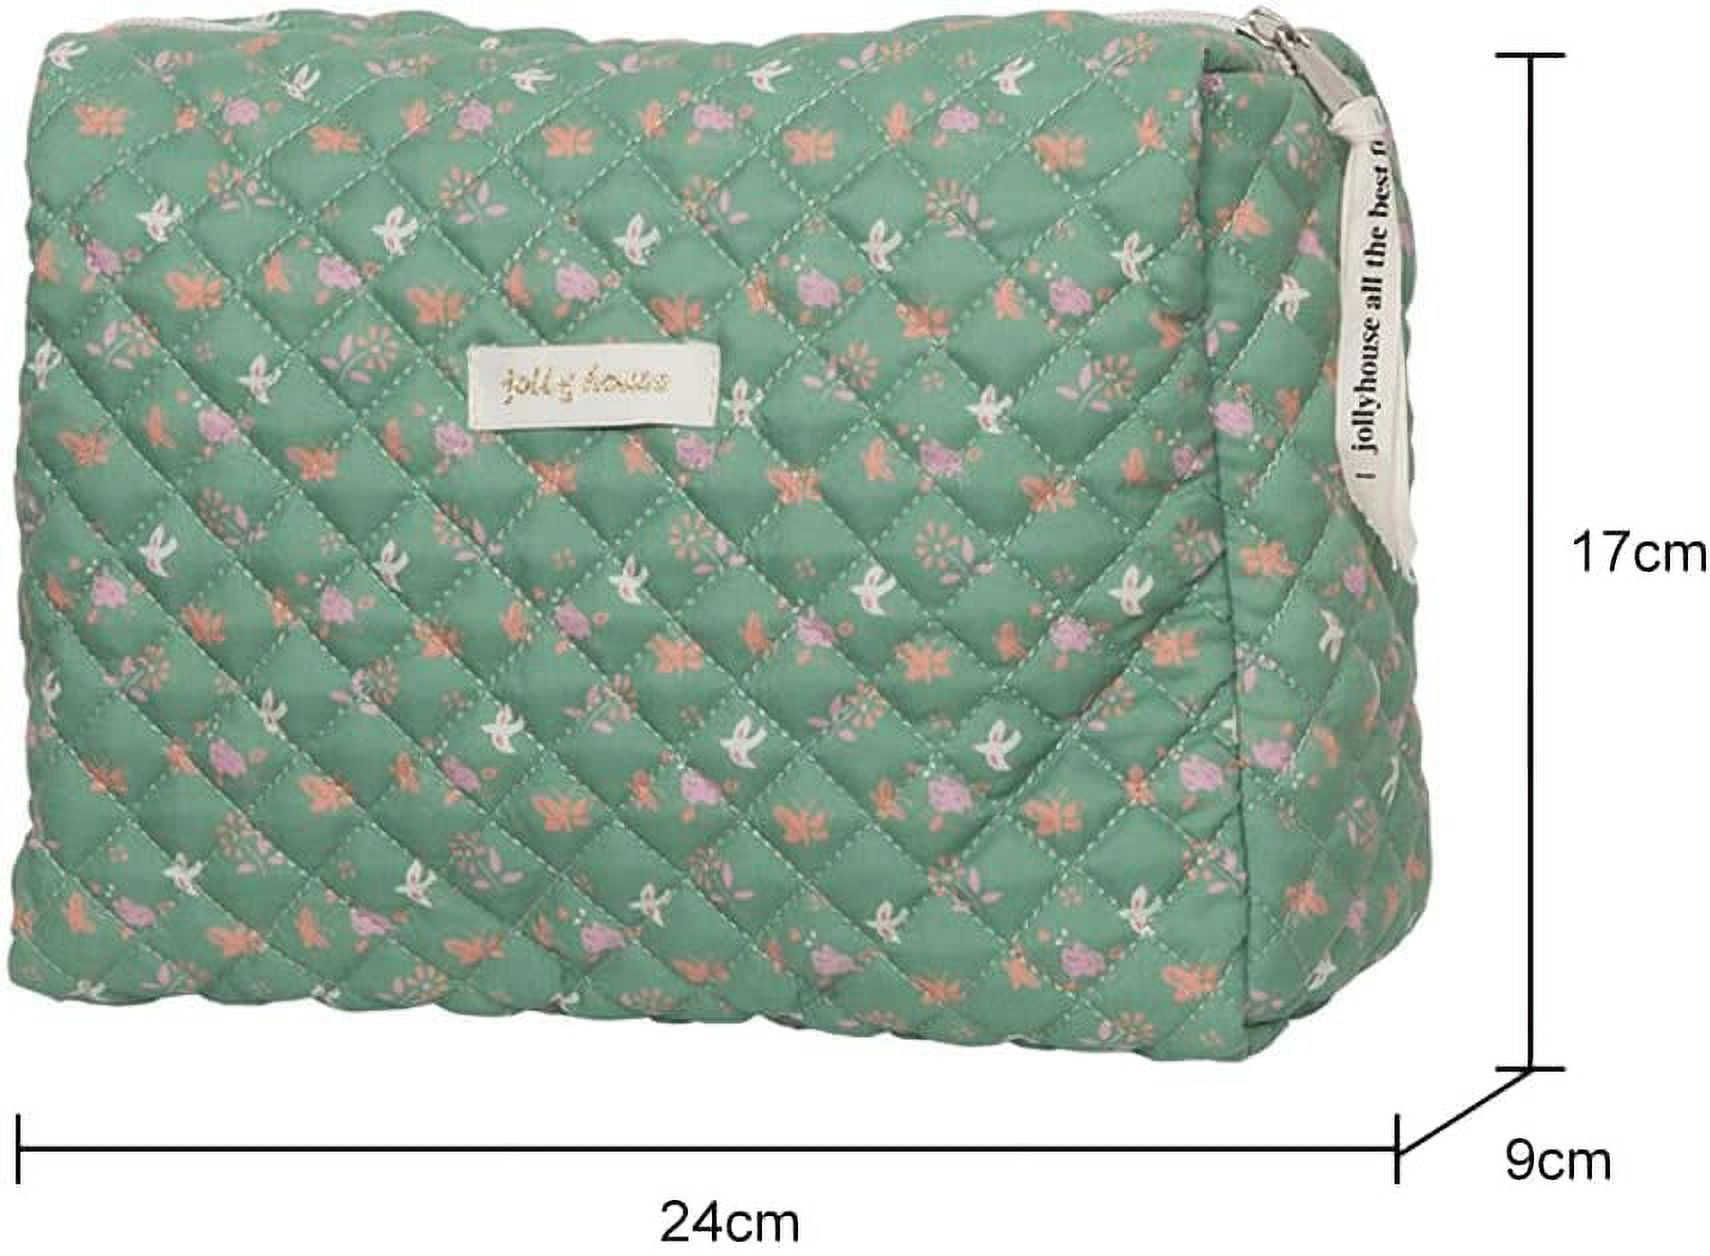 WLLHYF 6 Pieces Mesh Makeup Bags, Portable Cosmetic Bag Travel Toiletry Bag  Pouch with Zipper Makeup Pouches for Home Office Tra